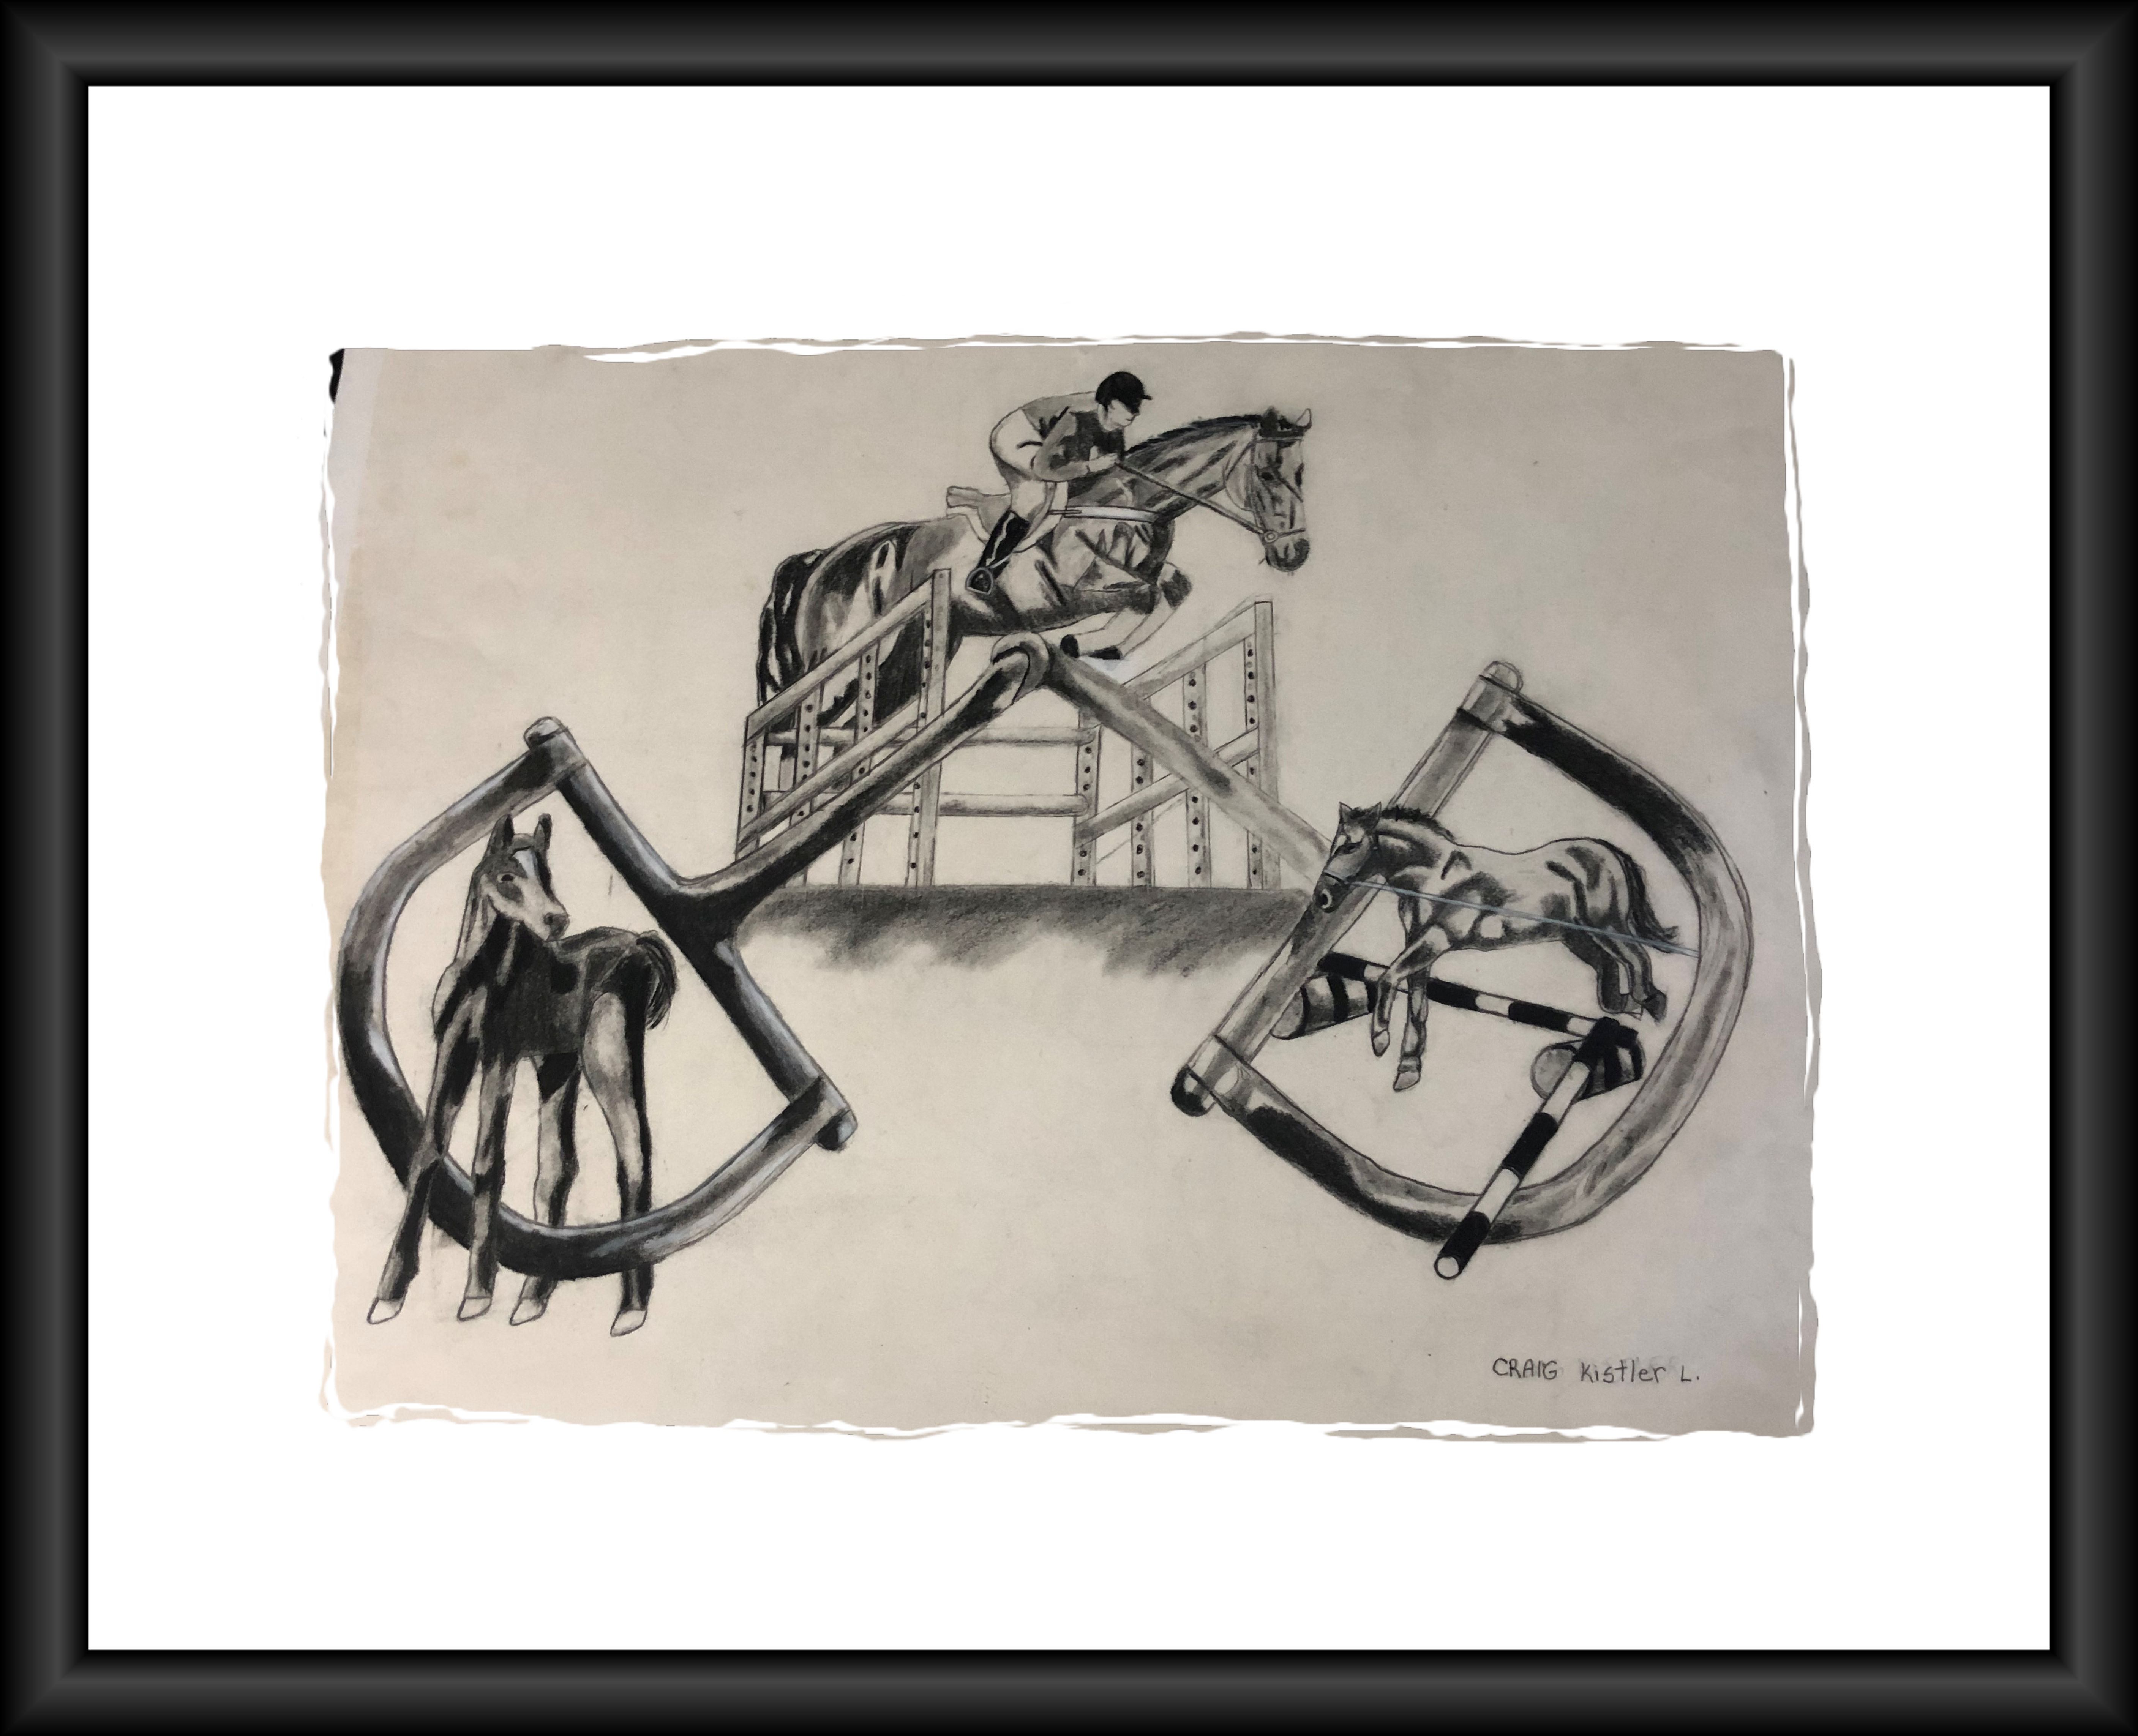 images/horse_jumping_bit_collage_1988 (1620K)